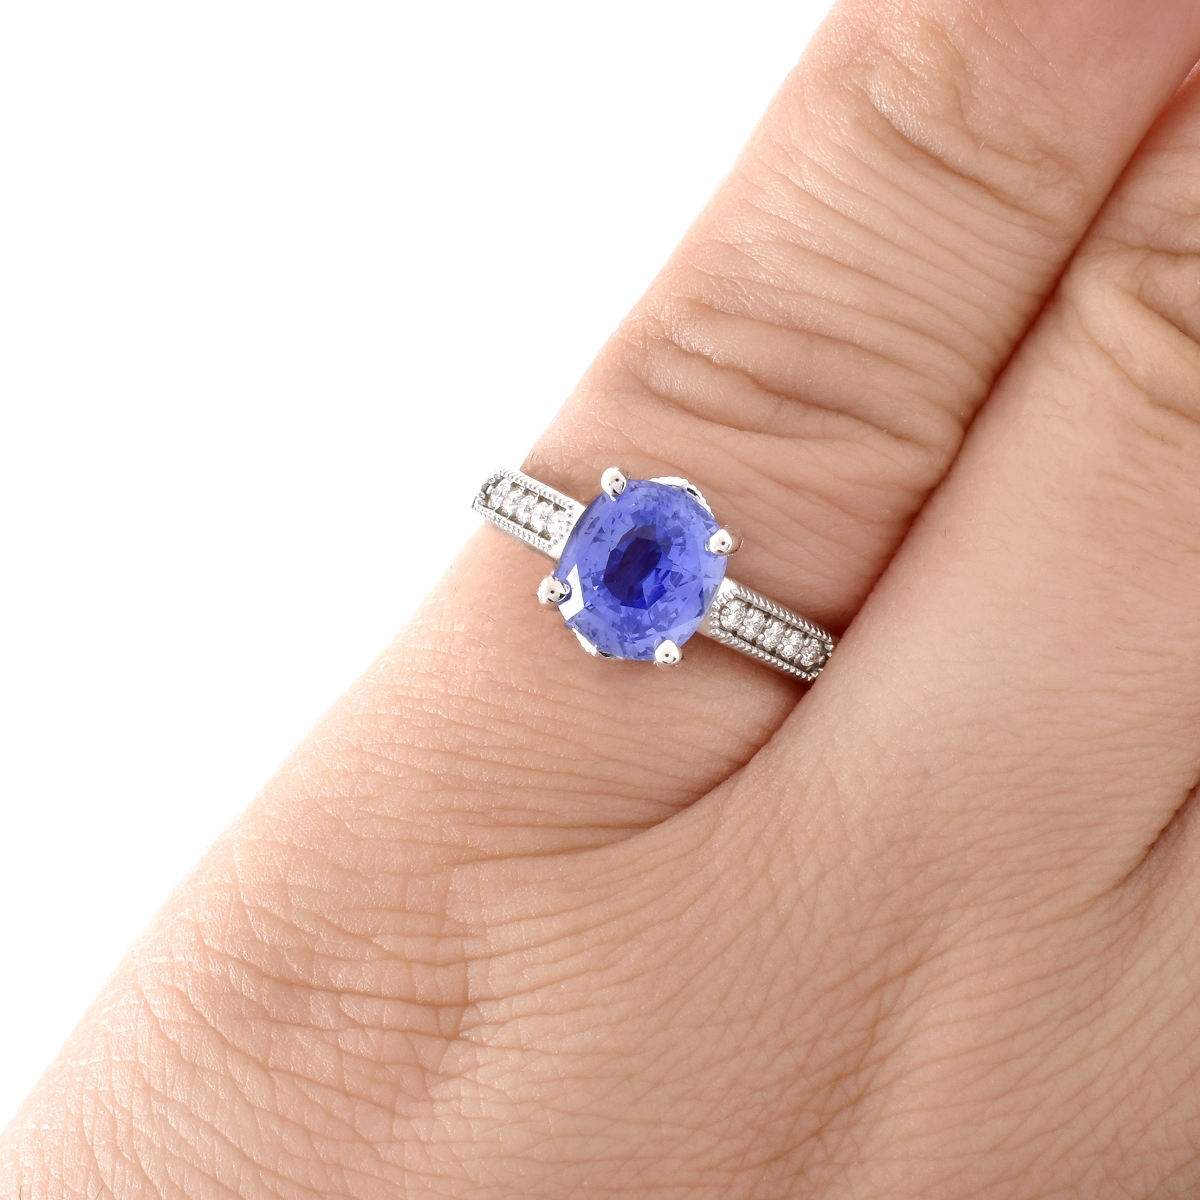 GIA 2.52ct. Sapphire, Diamond and 14K Gold Ring